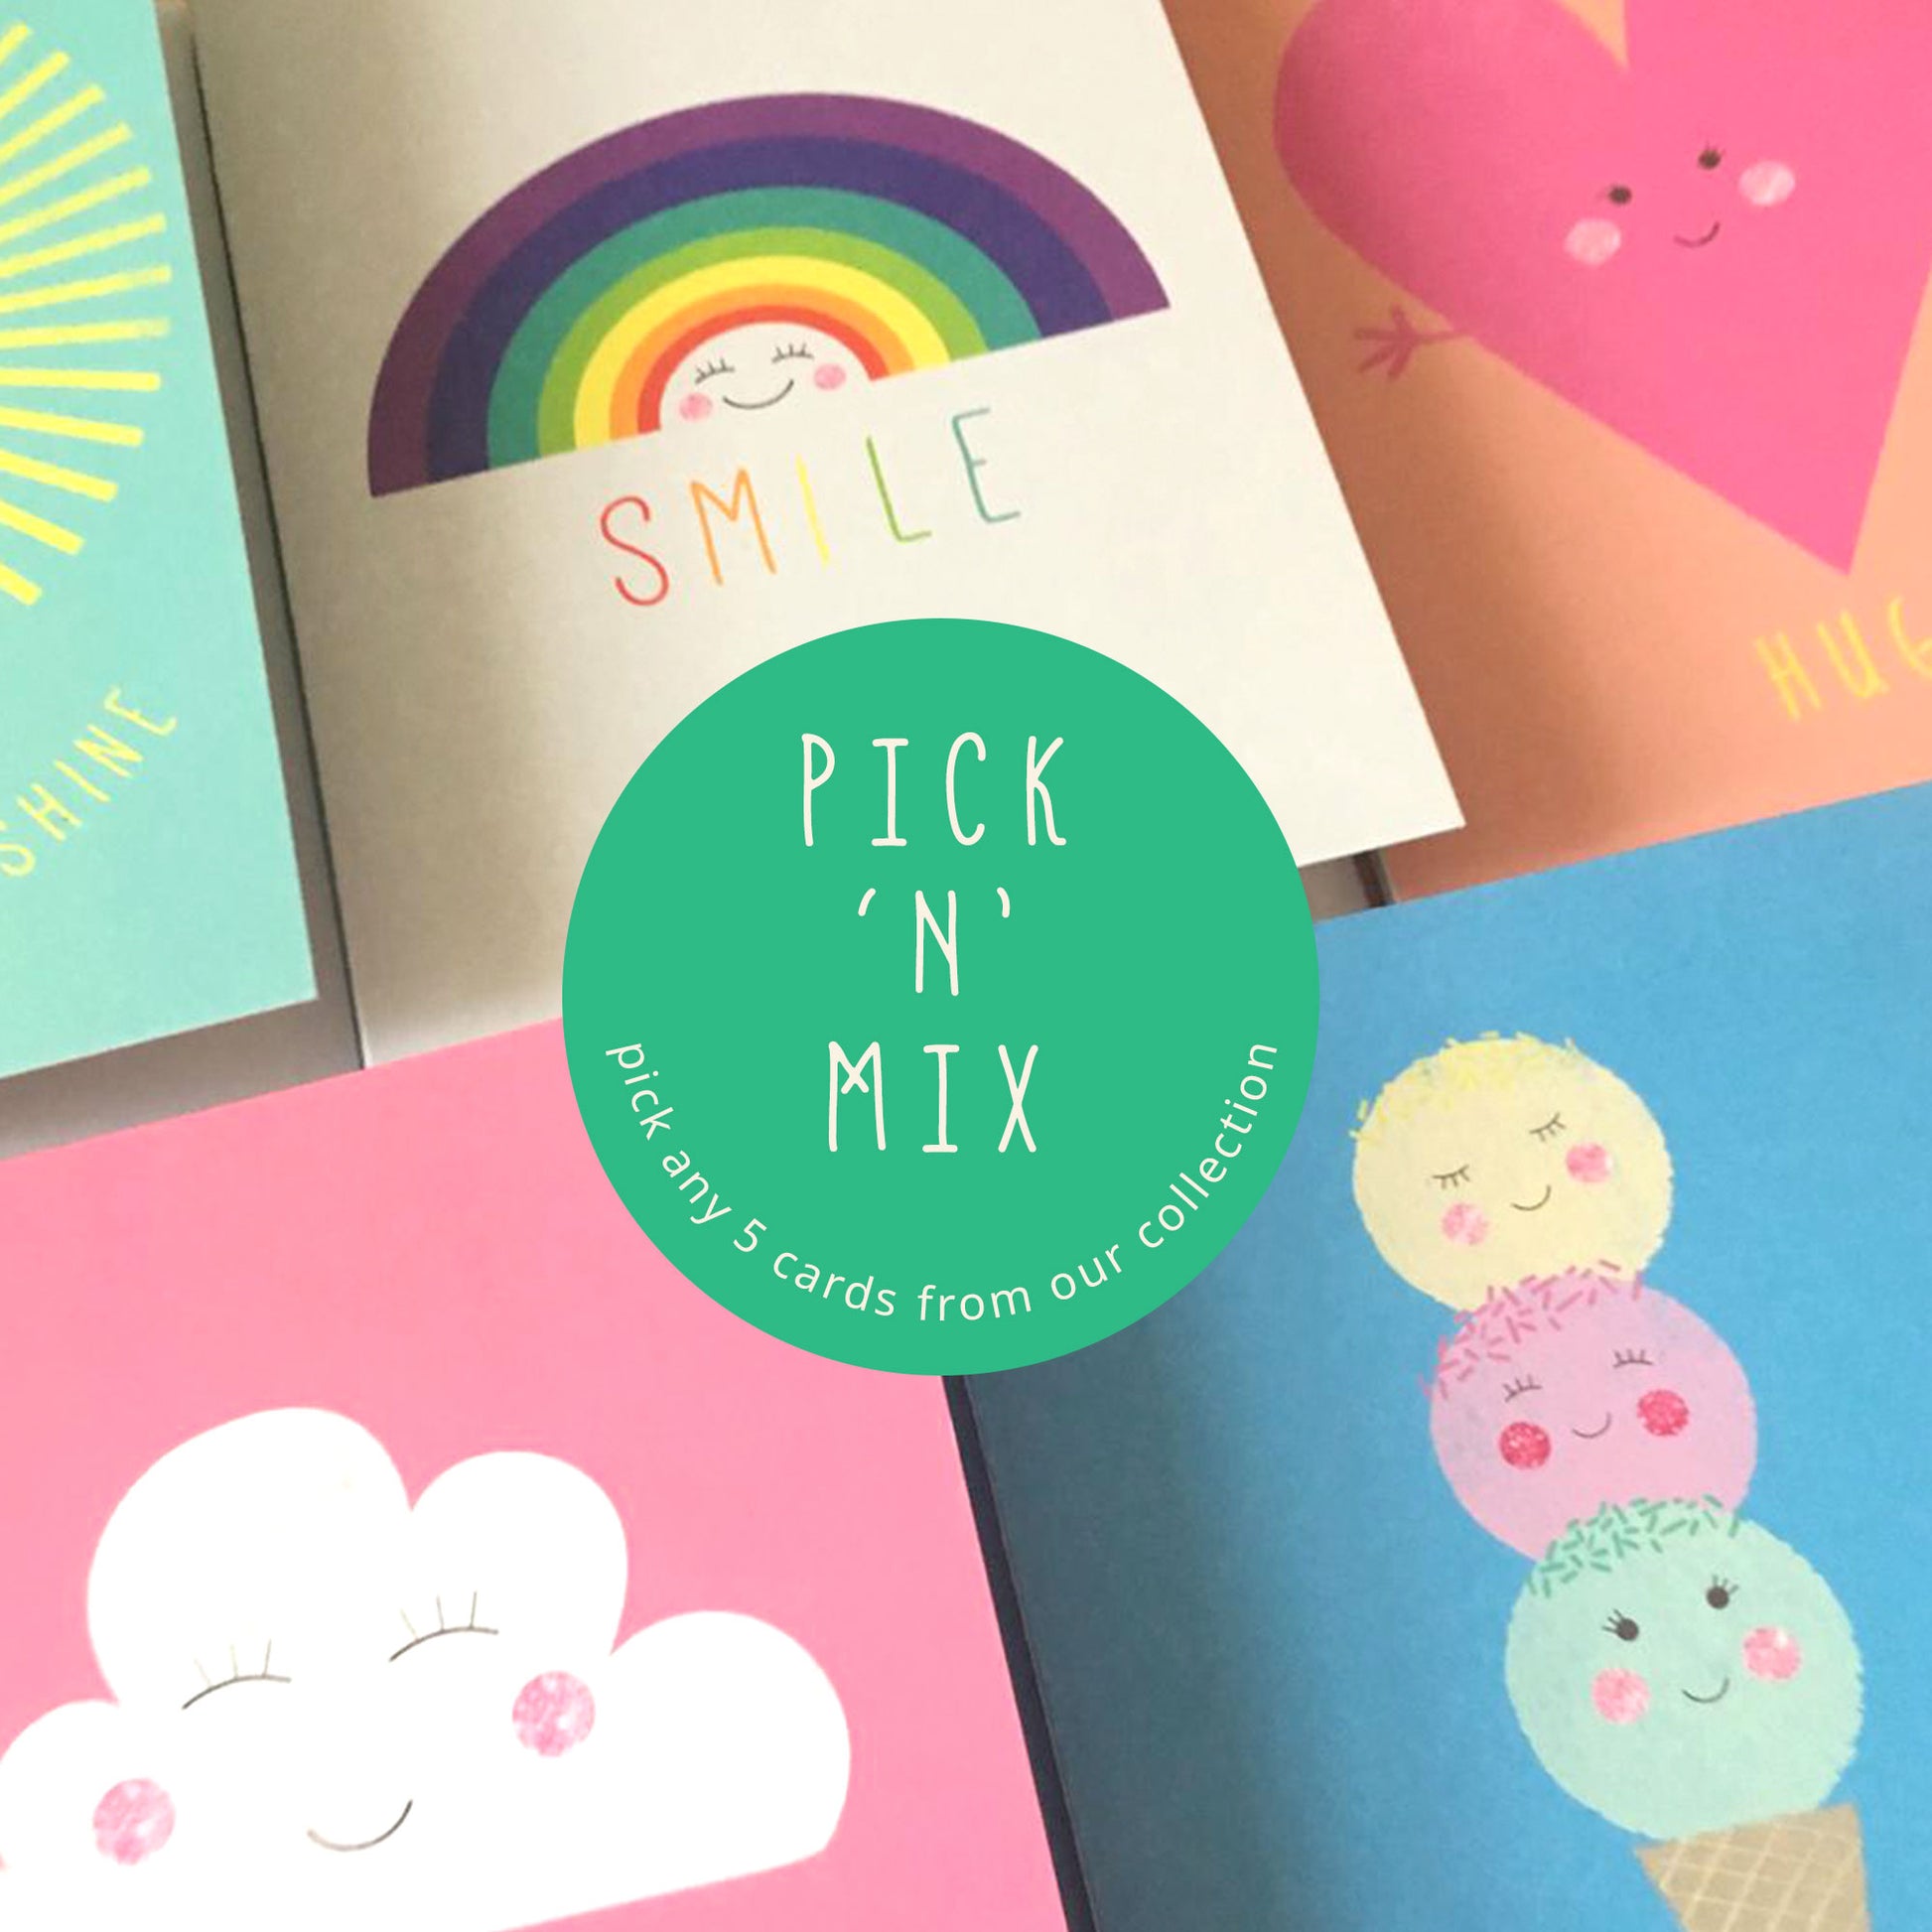 Card Bundle - 5 cards for the price of 4 - by Lilly & Bright